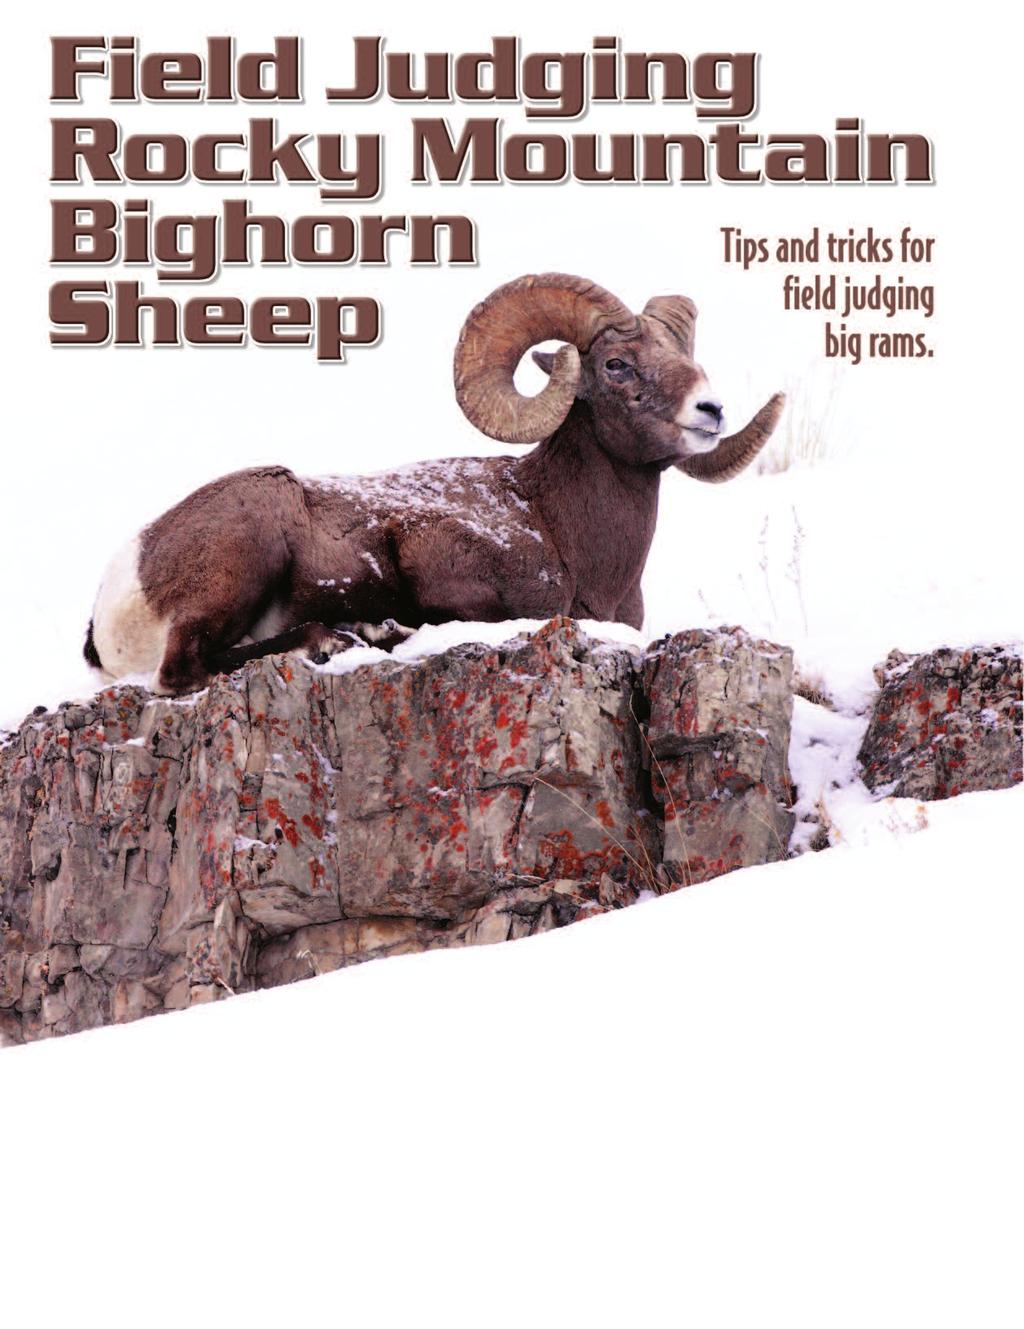 By Jay Scott, Field Editor Scoring Photos and Estimates by Tim Rushing Rocky Mountain bighorn sheep can be found in many of the western states including New Mexico, Arizona, Montana, Idaho, Wyoming,